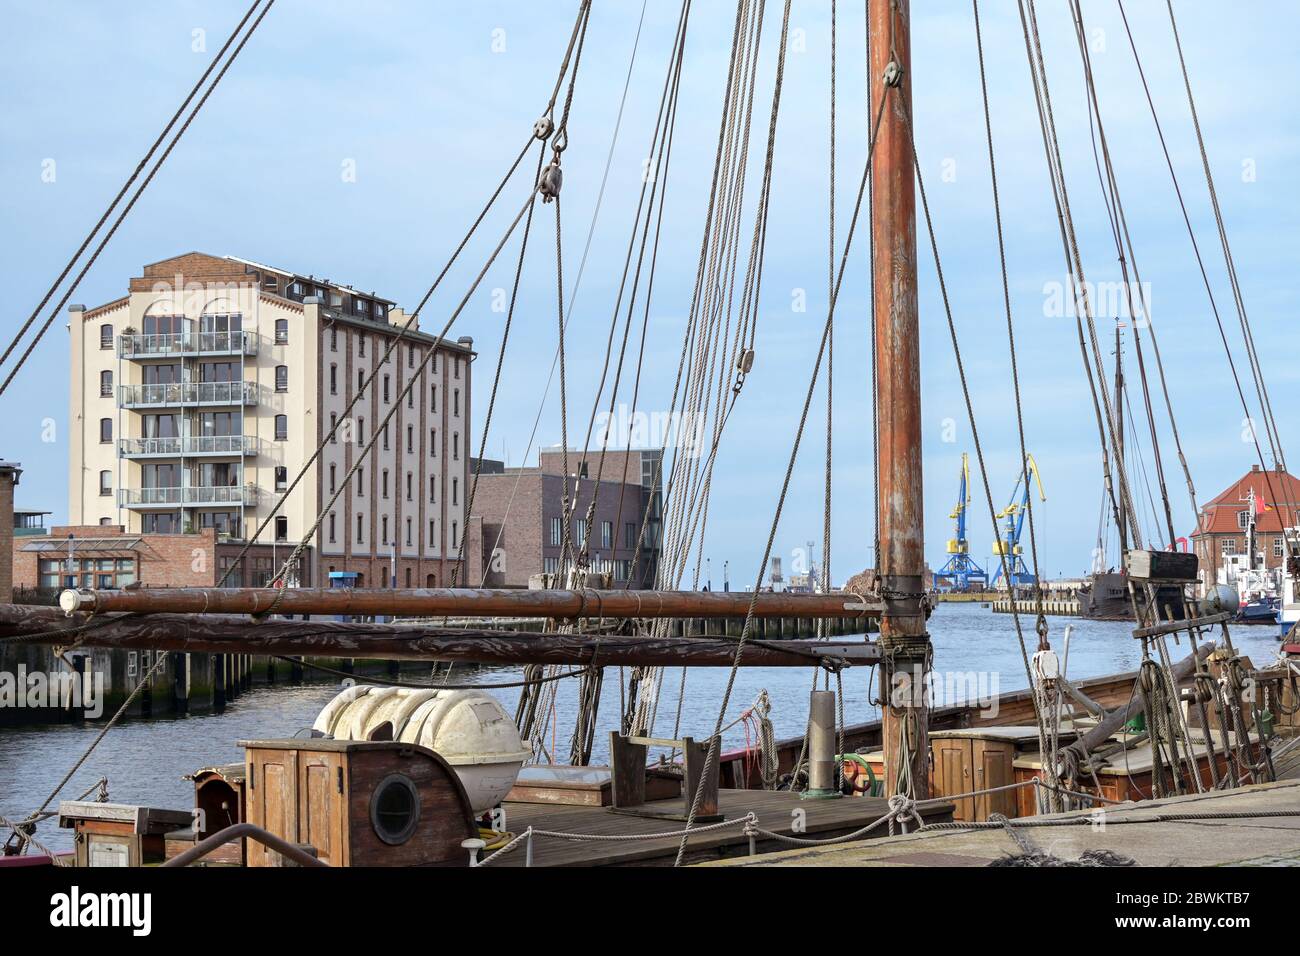 Harbor of Wismar on the Baltic Sea with a historical sailing ship in the foreground, tourist magnet in the old hanseatic town, Germany, Europe, select Stock Photo